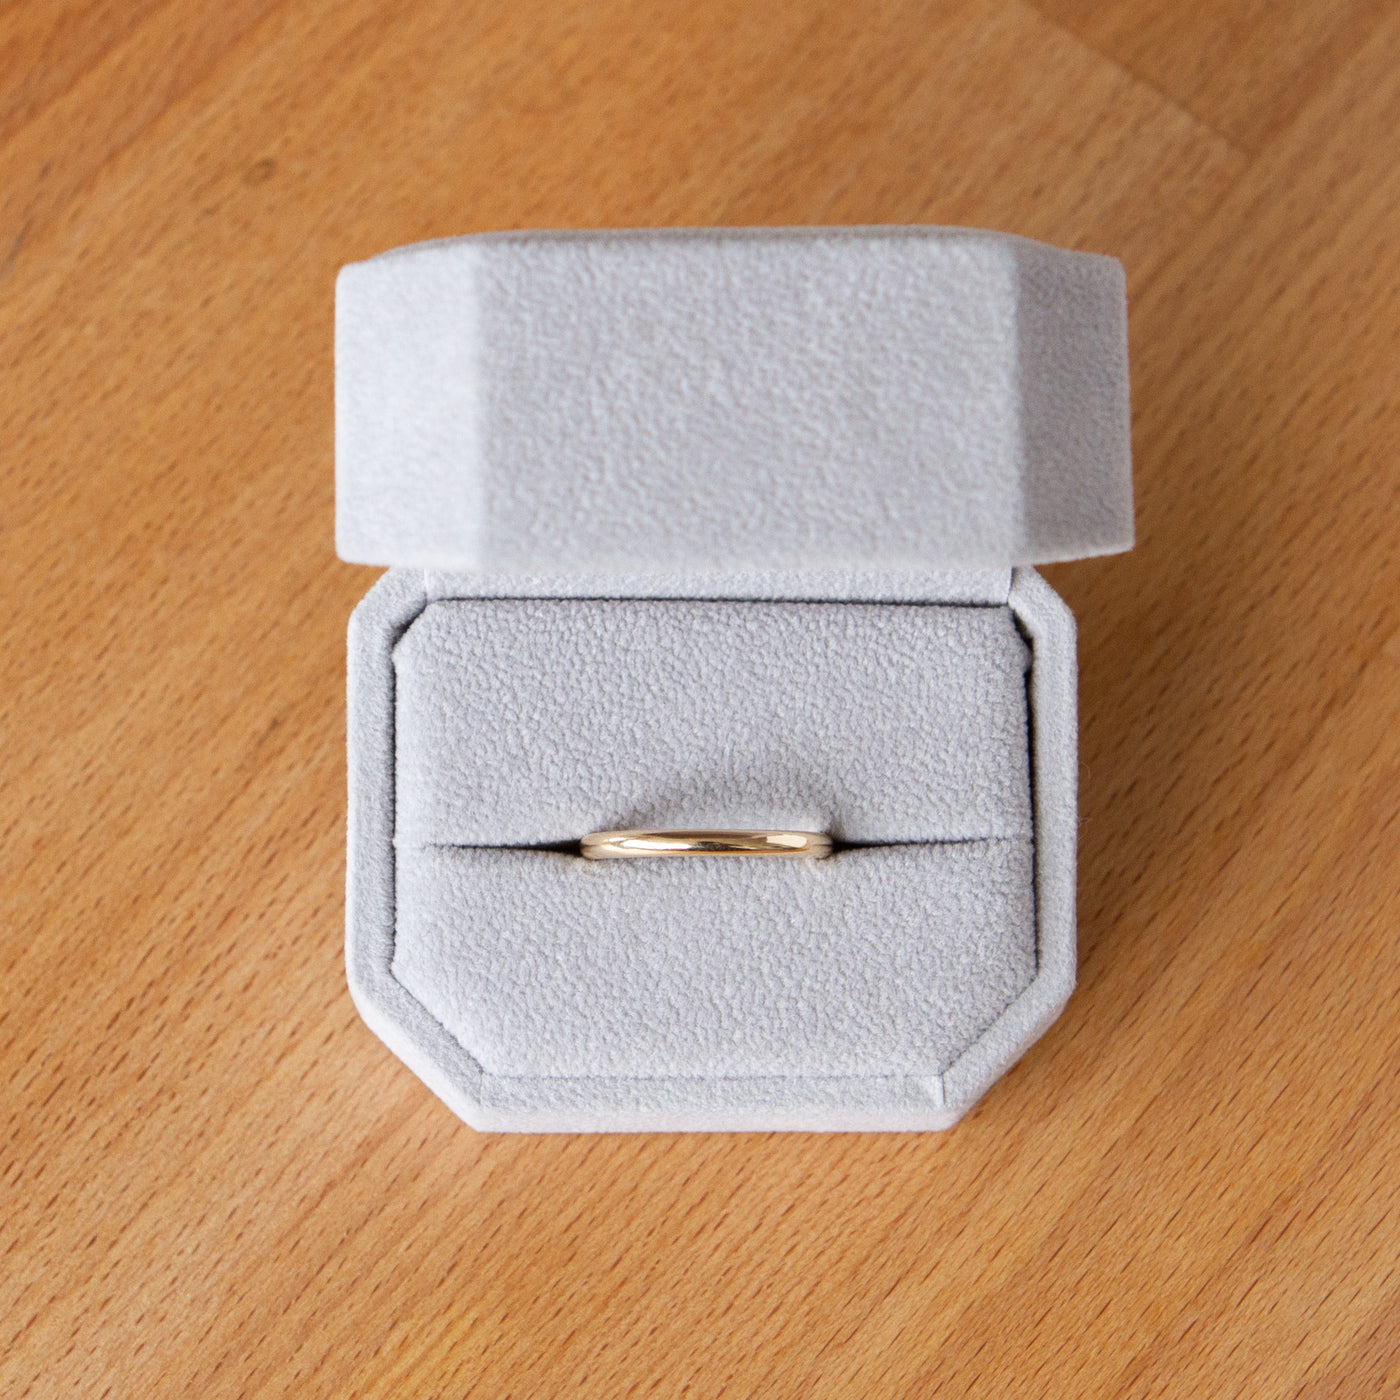 Shiny half-round thin Muir wedding band in 14k yellow gold in a ring box